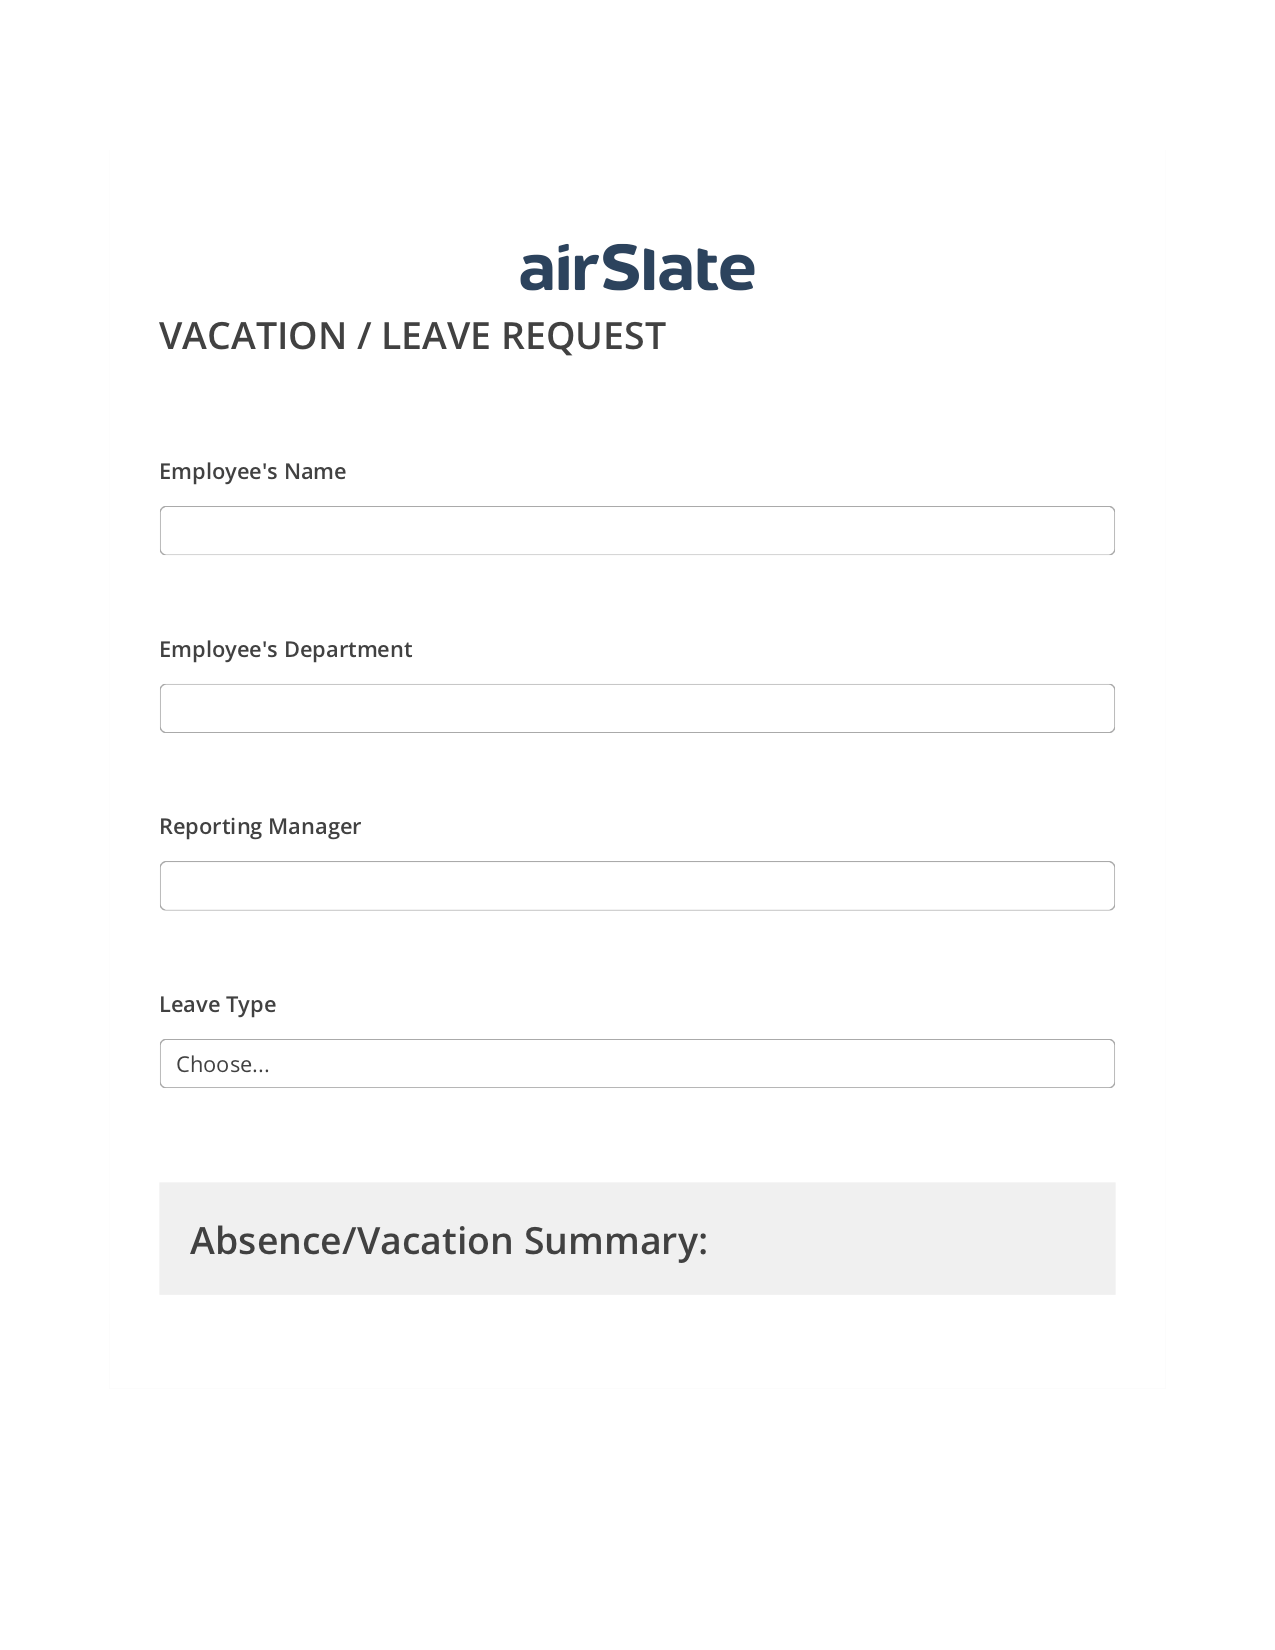 Vacation/Leave Request Workflow Pre-fill Dropdowns from MySQL Bot, Google Cloud Print Bot, Export to Excel 365 Bot